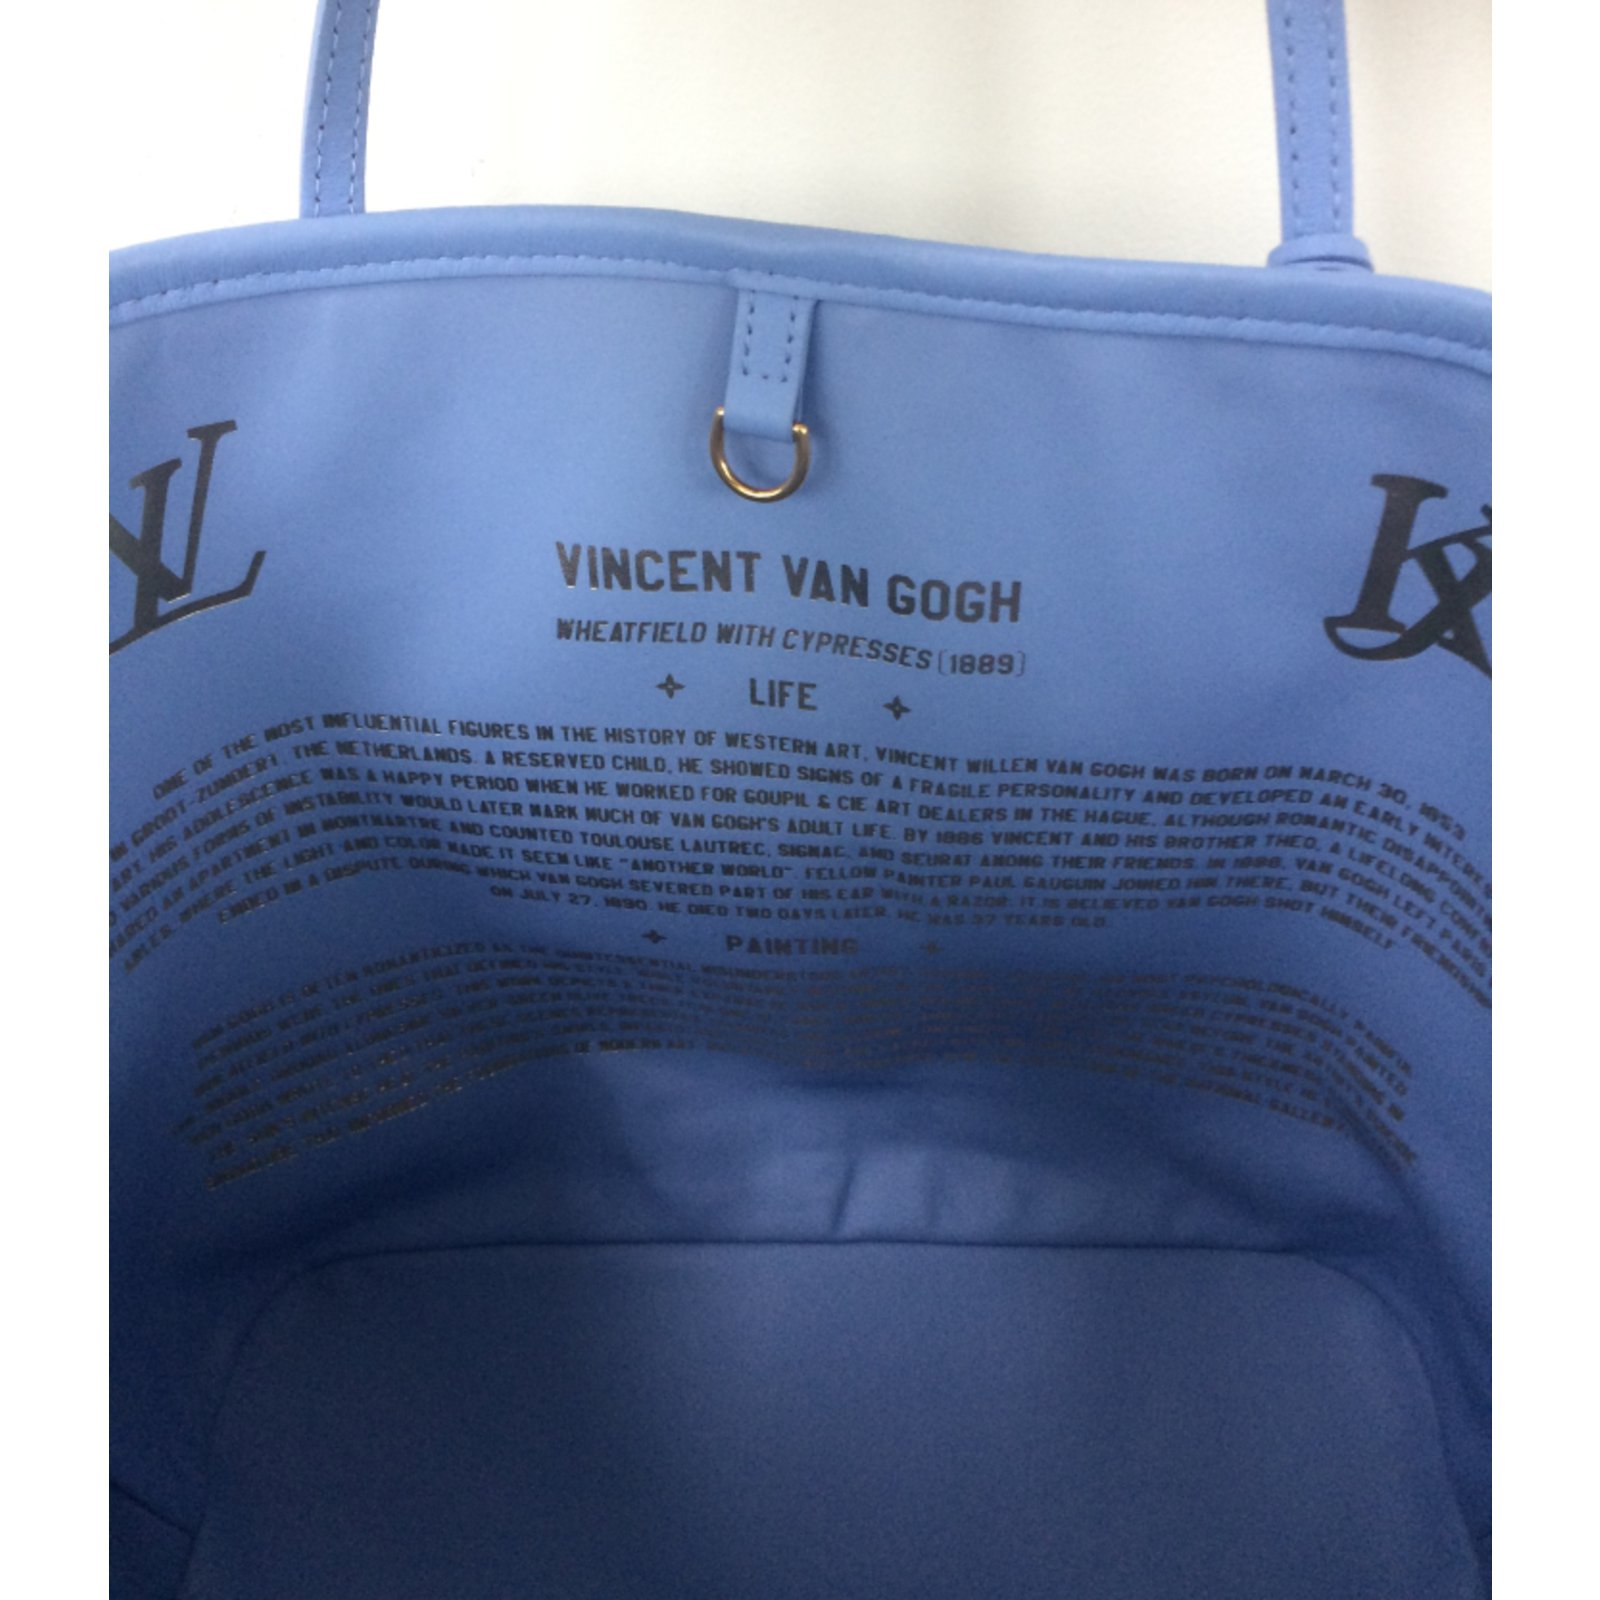 Louis Vuitton Neverfull NM Tote Limited Edition Jeff Koons Van Gogh Print  Canvas MM Blue 93279121